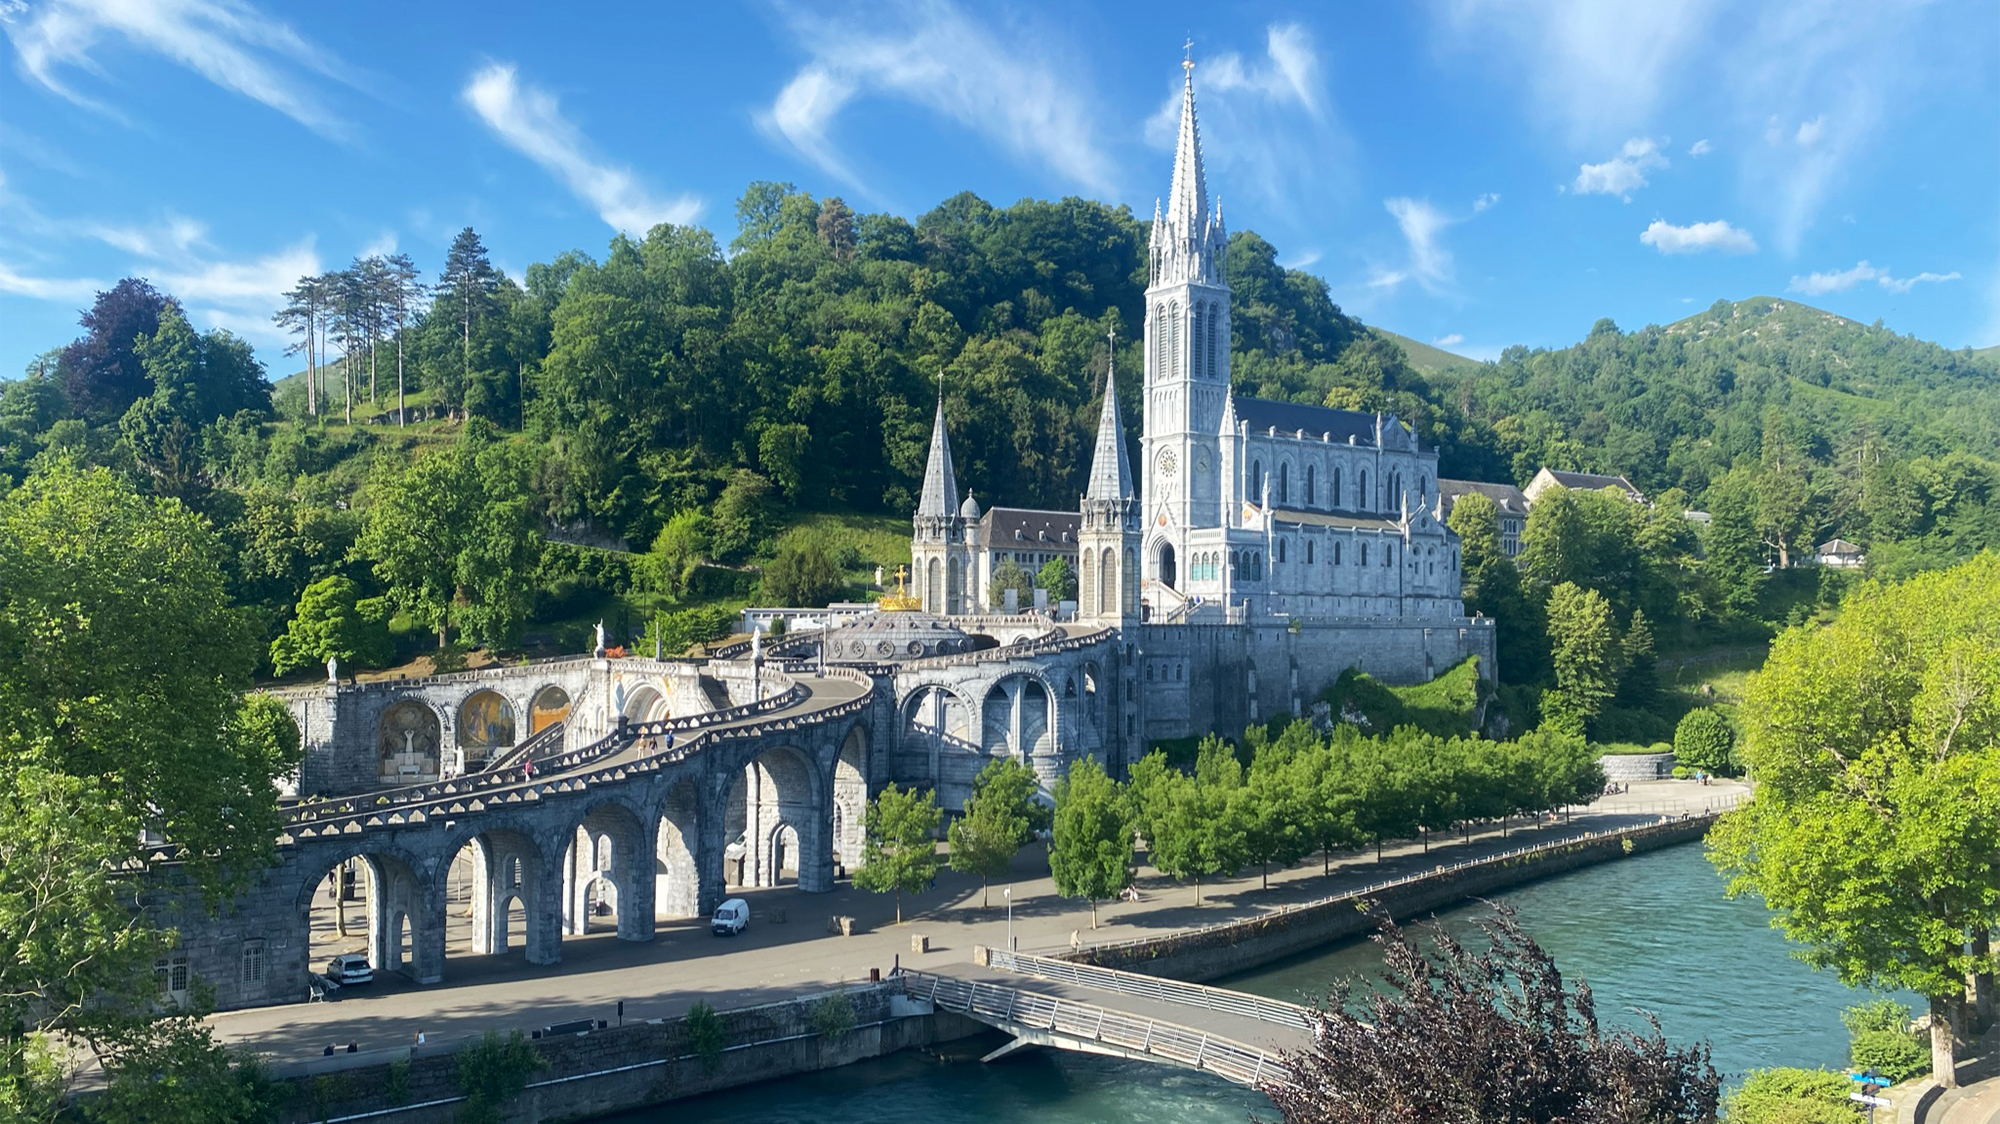 The sanctuary at Lourdes pictured on a sunny day